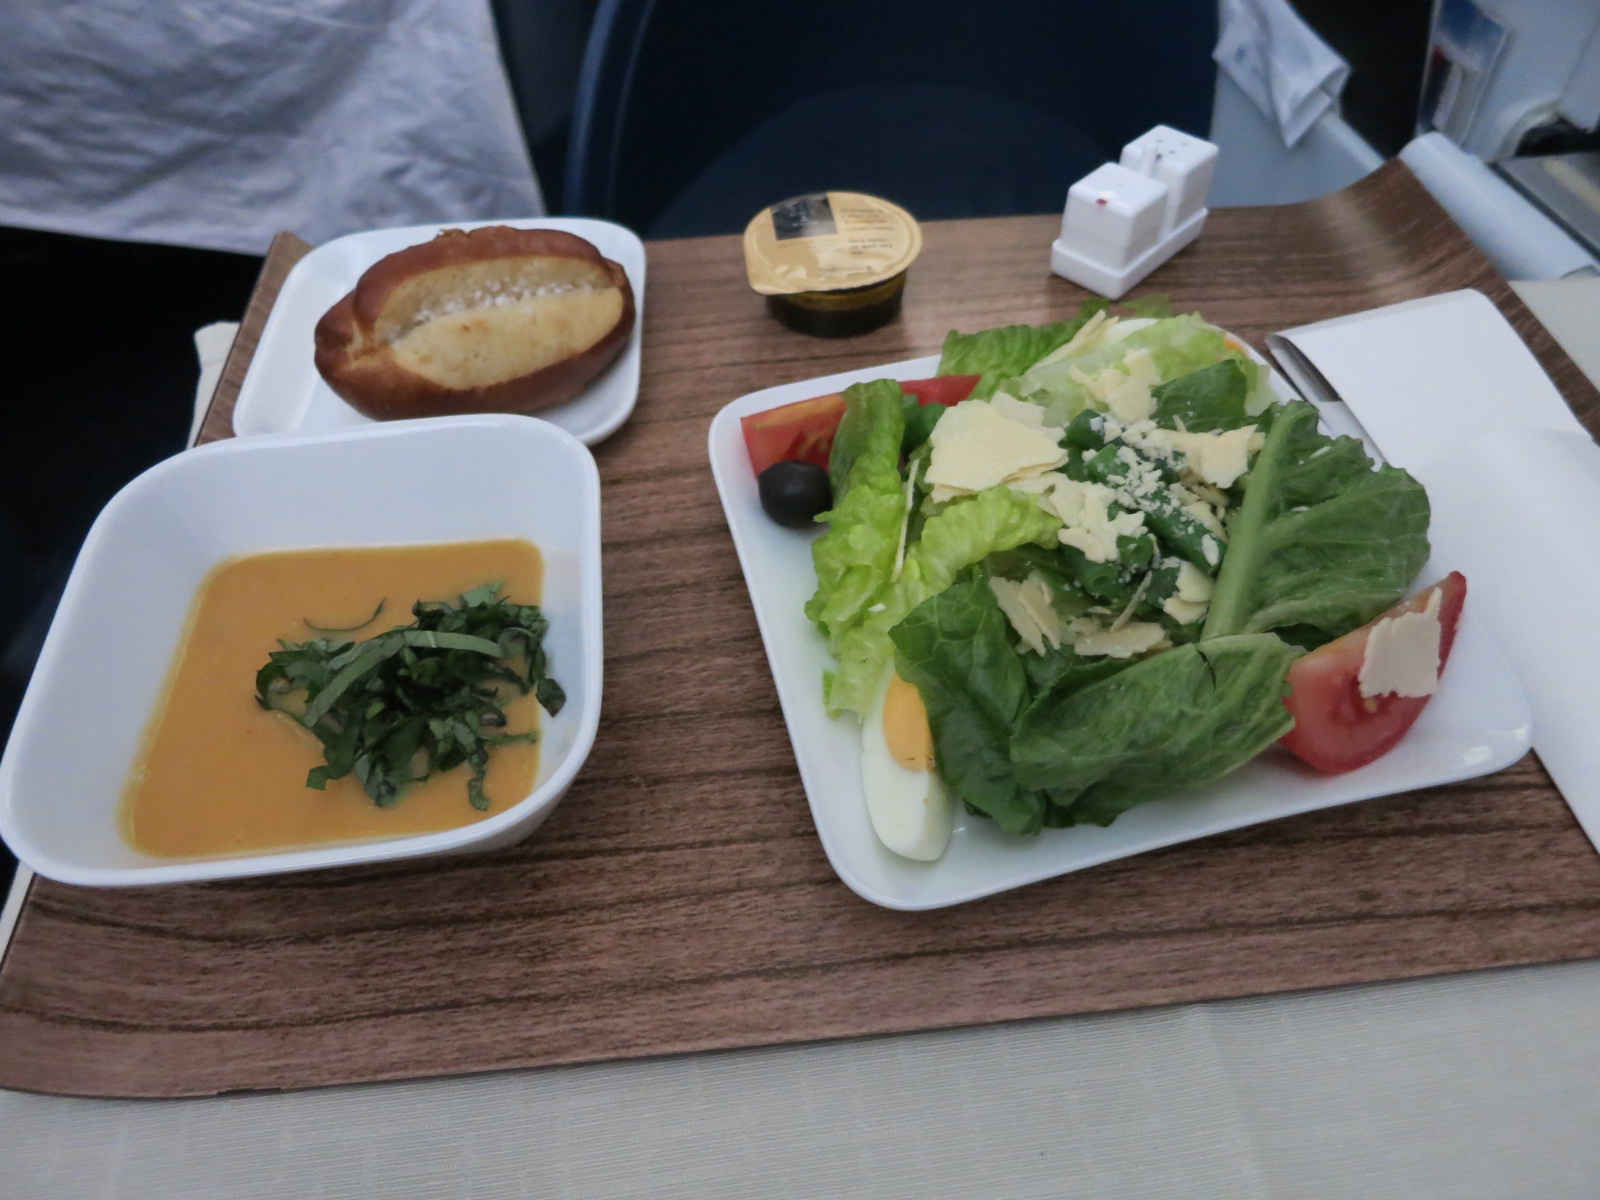 Delta Asks Business Class Passengers To Consider Skipping Meals, For The Environ..